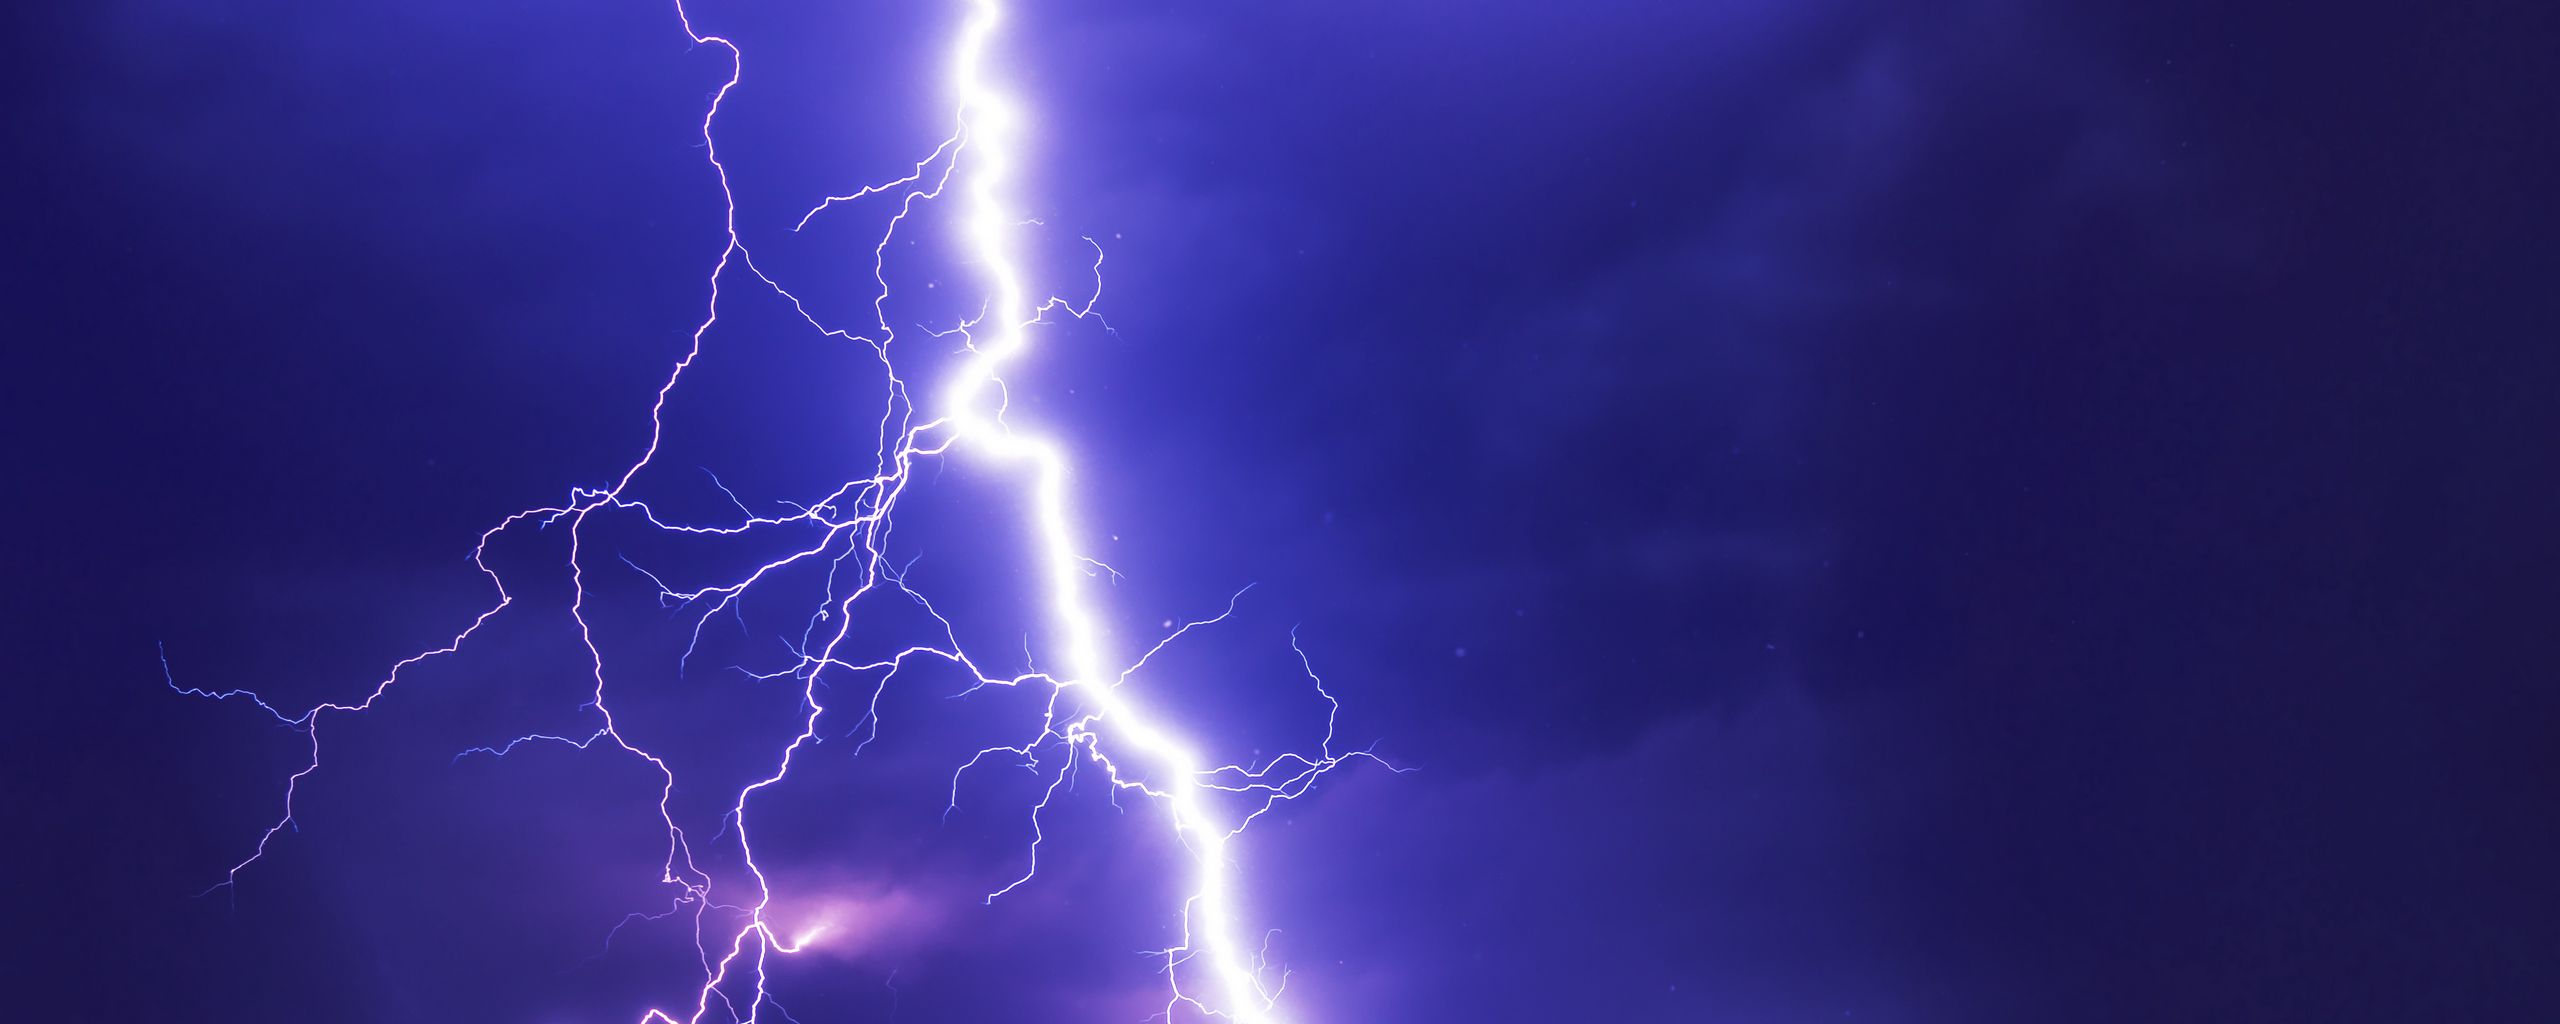 Download wallpaper 2560x1024 lightning, thunderstorm, sky, cloudy ultrawide  monitor hd background